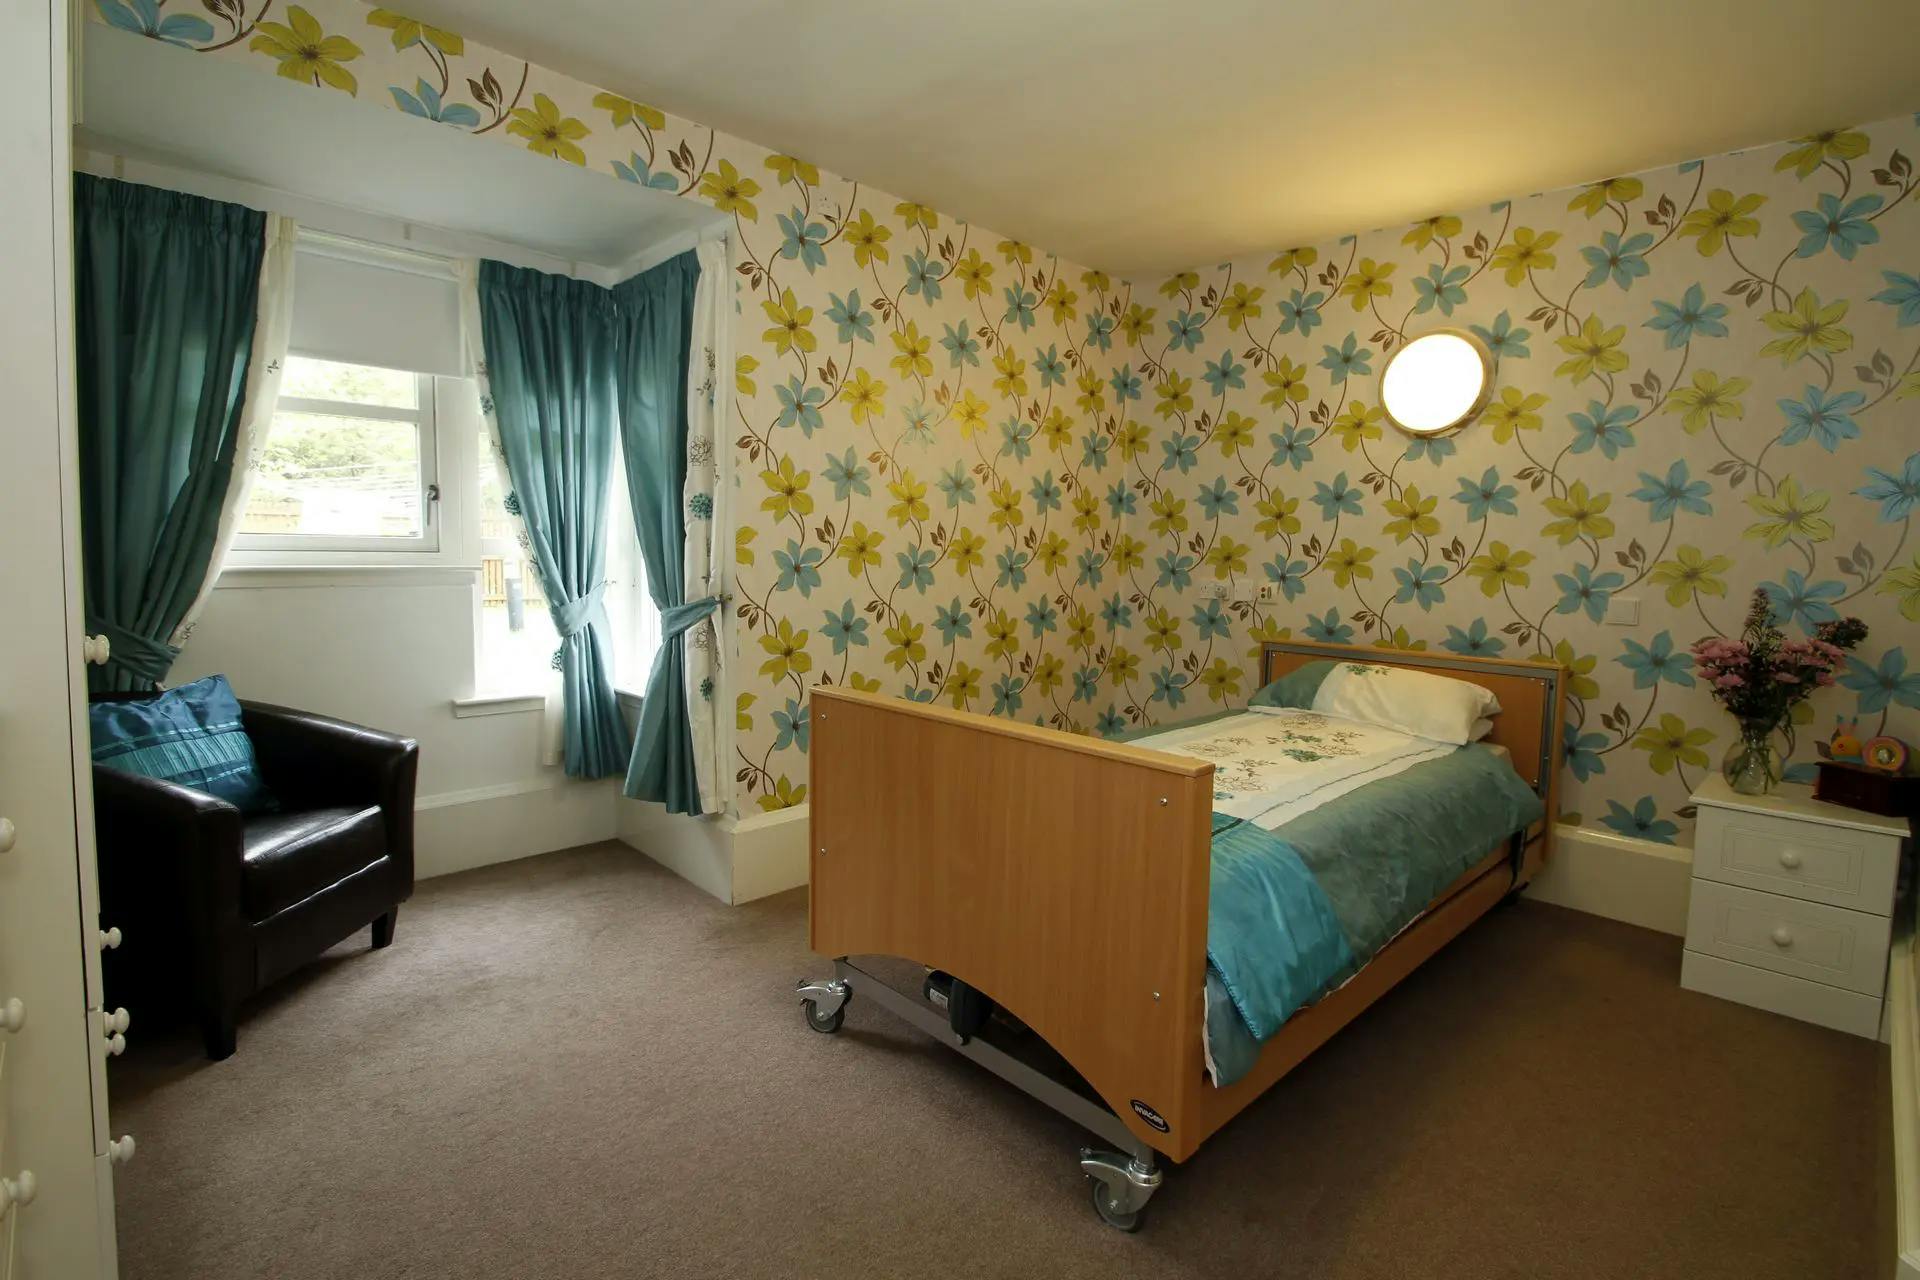 Bedroom at Hillview Court Care Home in Alloa, Clackmanshire